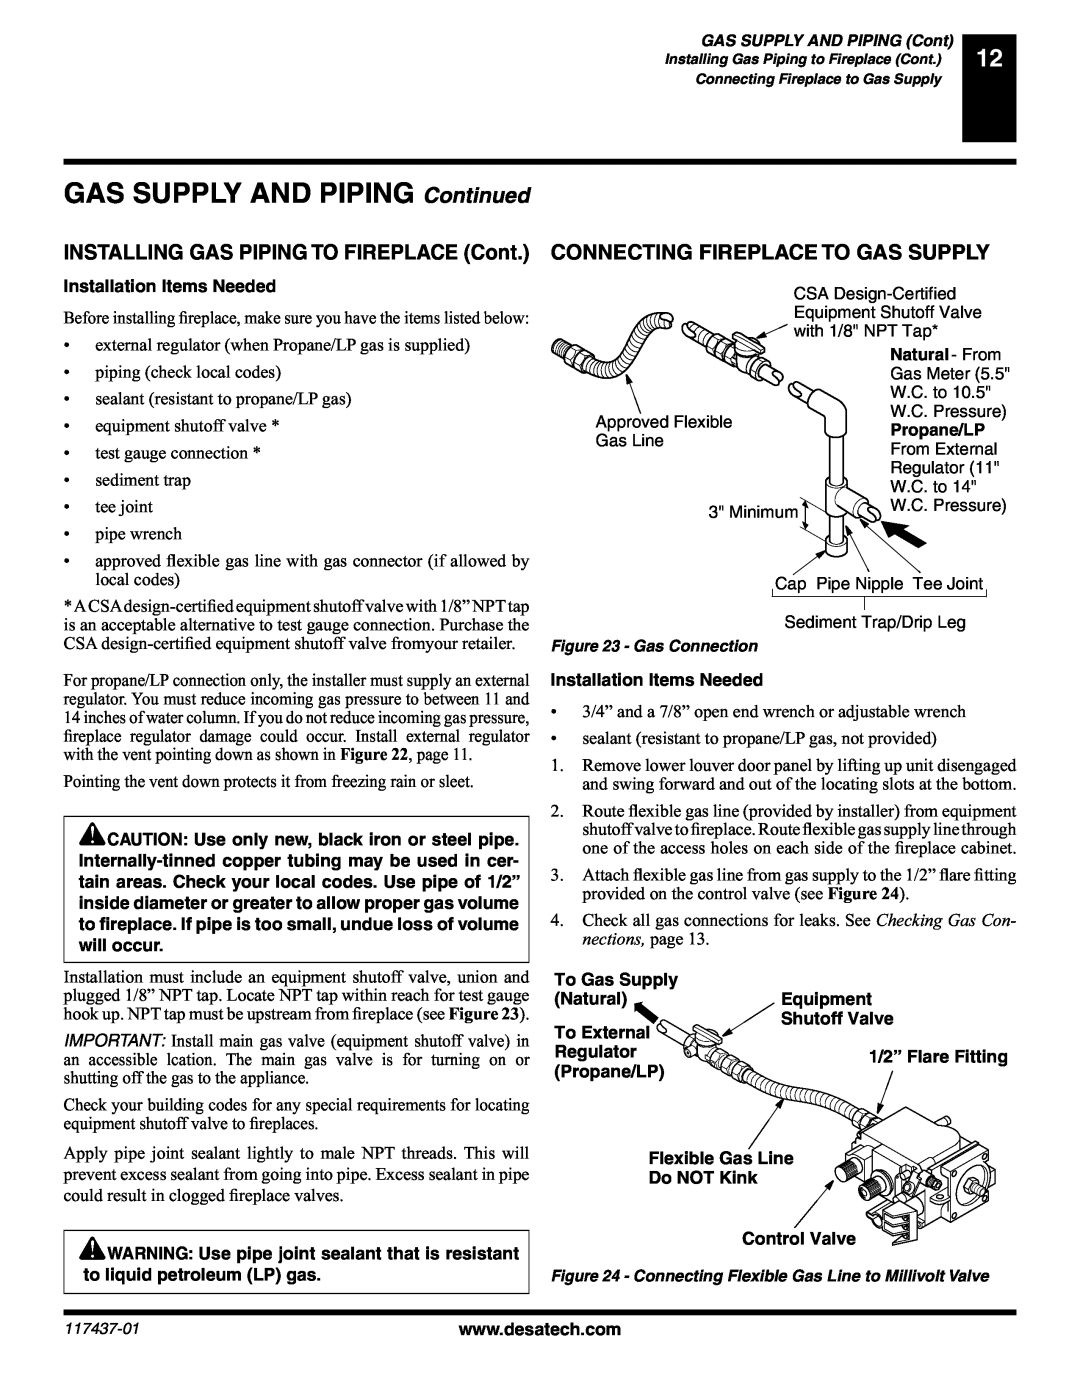 Desa (V) CB36(N GAS SUPPLY AND PIPING Continued, Installation Items Needed, Natural - From, Propane/LP, To External 